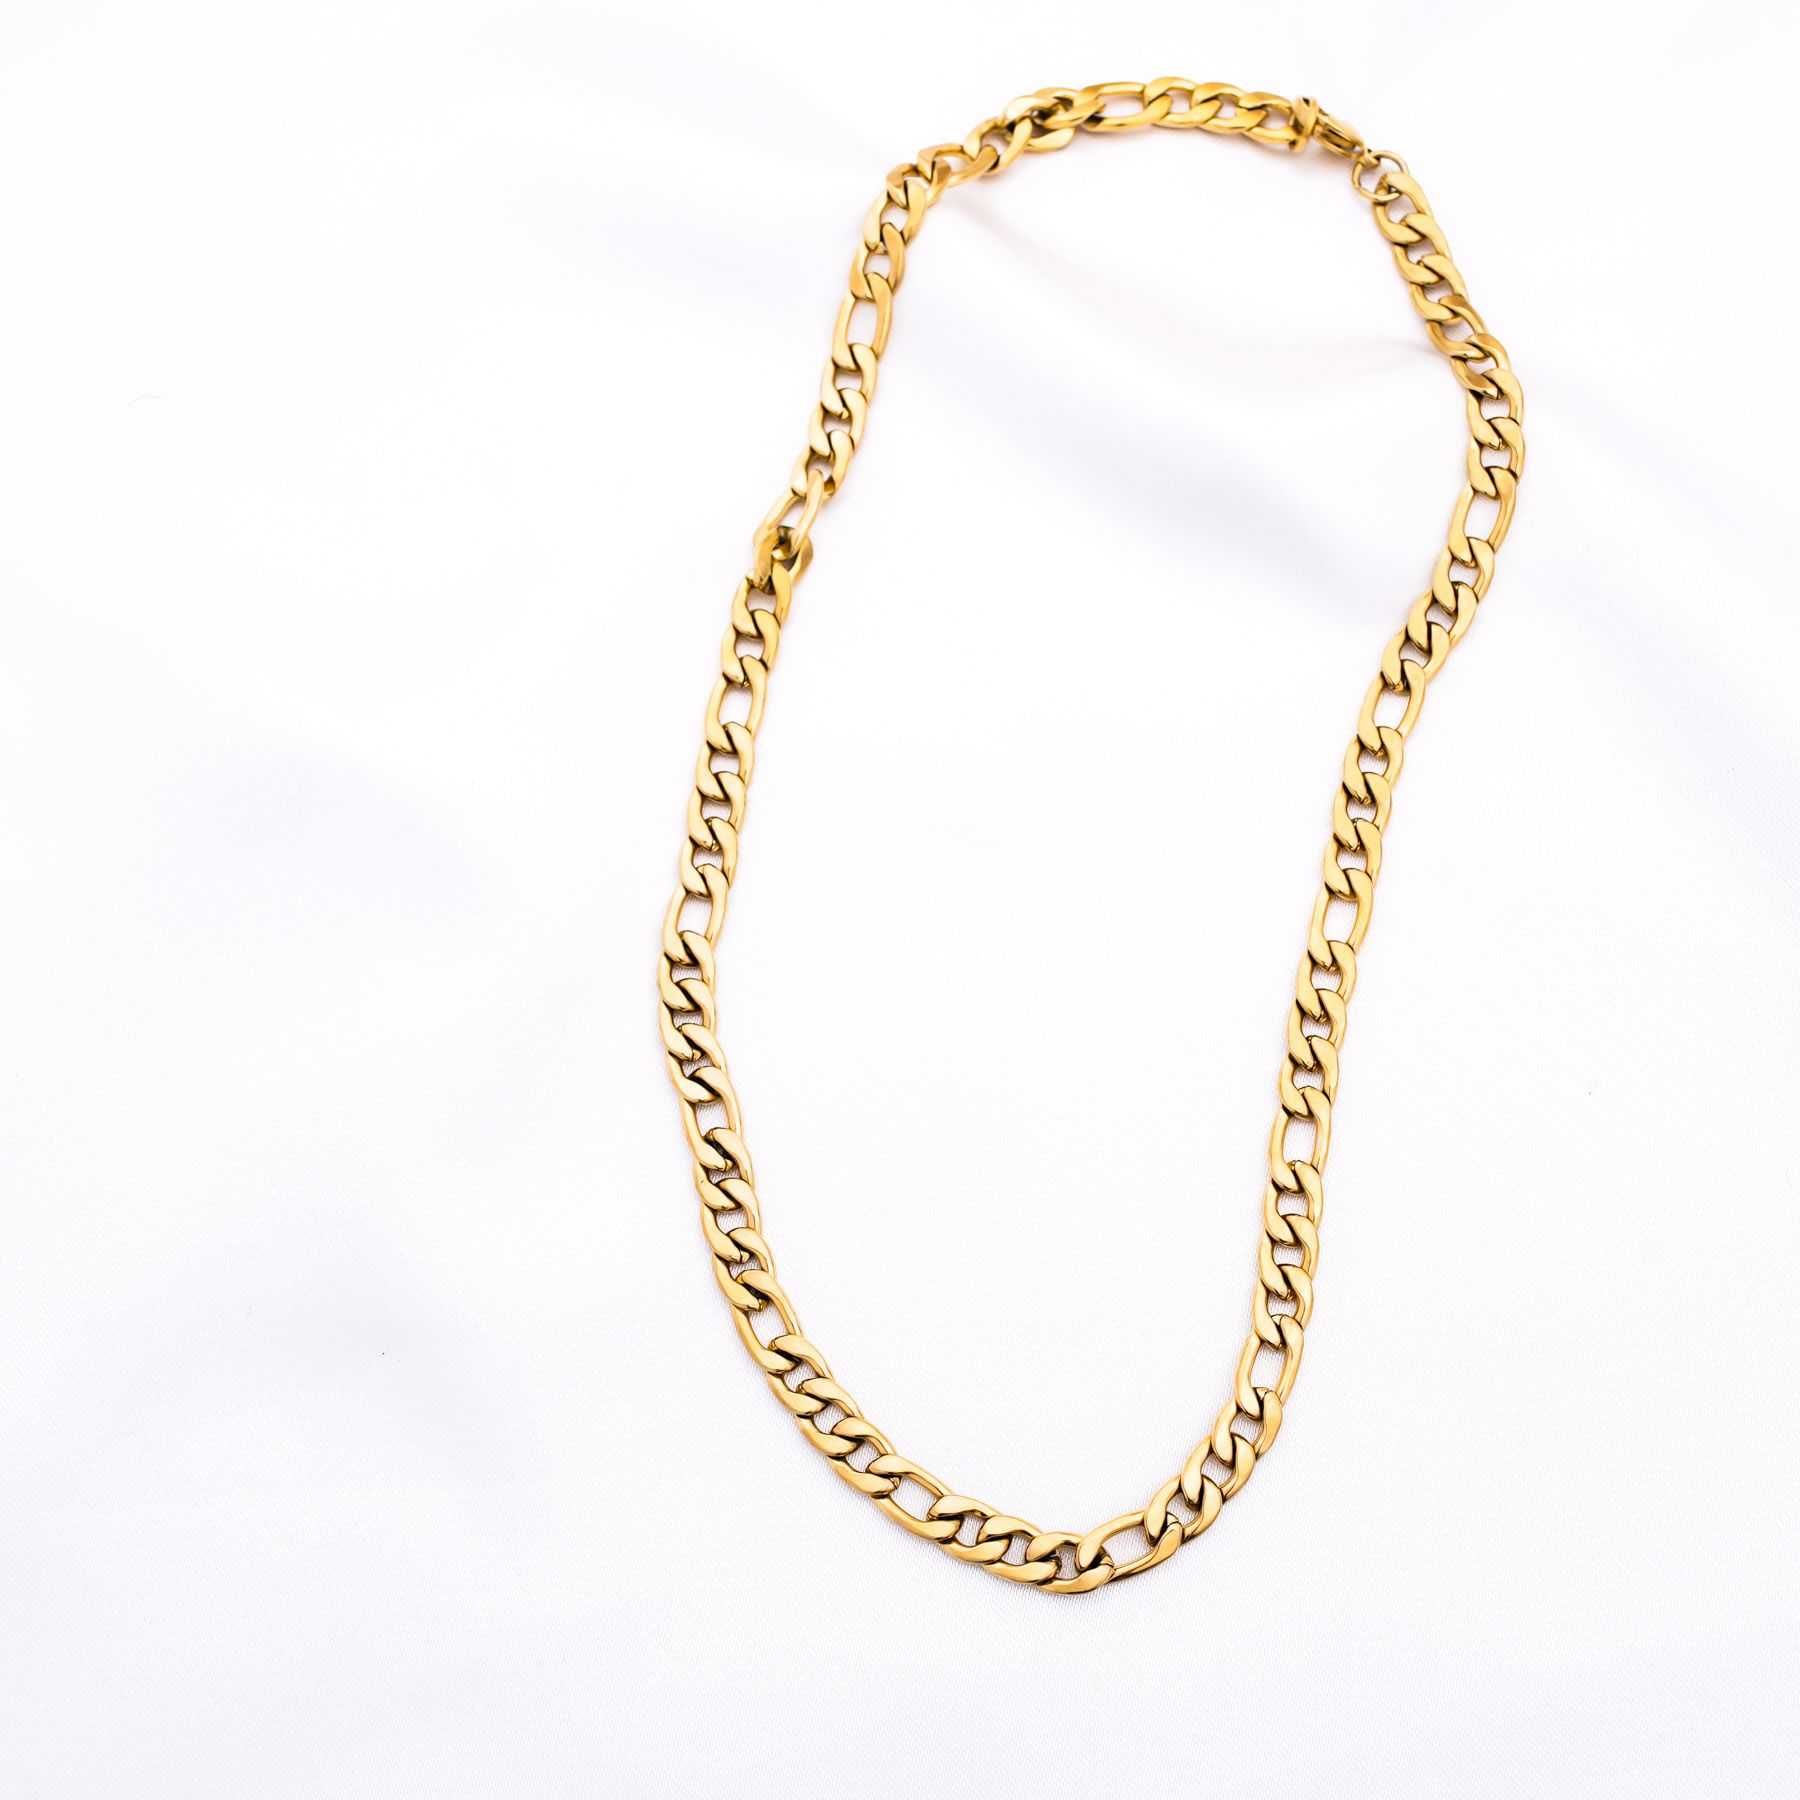 CAIRO CHAIN NECKLACE - GOLD